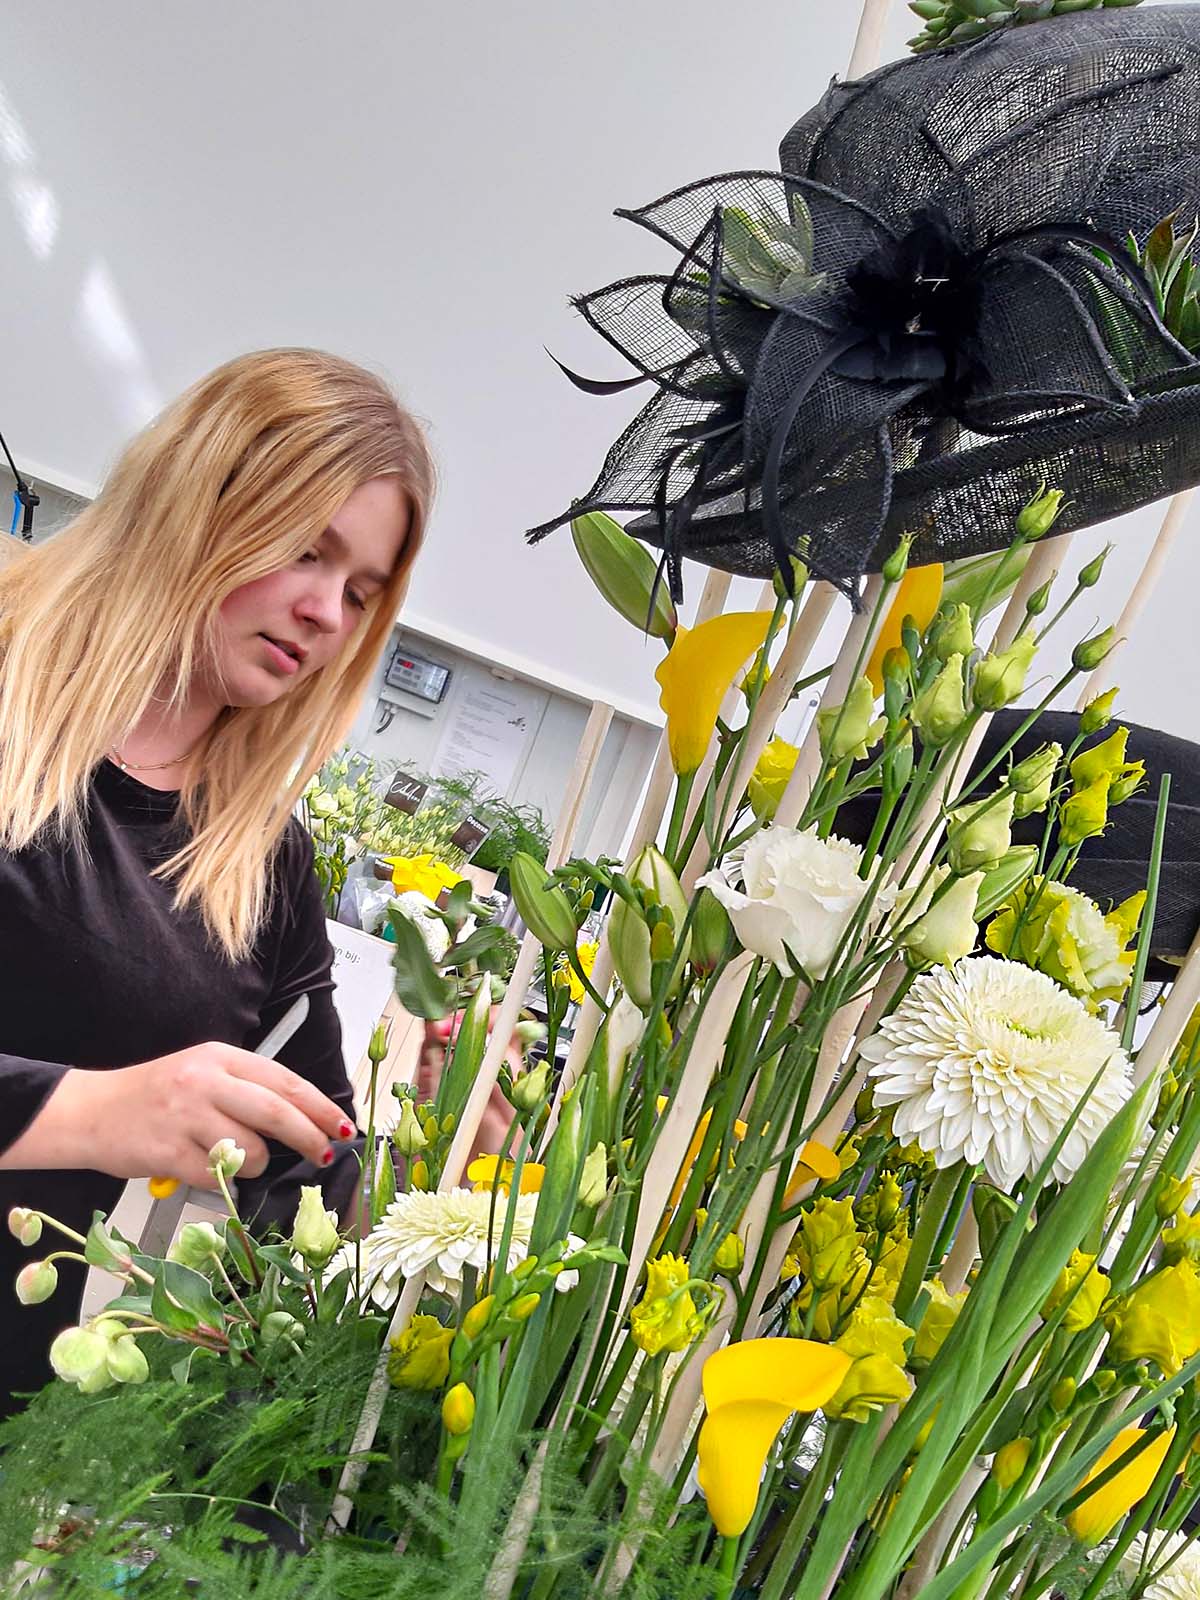 Floriculture Connects With Fashion at The Hague Fashion Week Dewi Ots 01